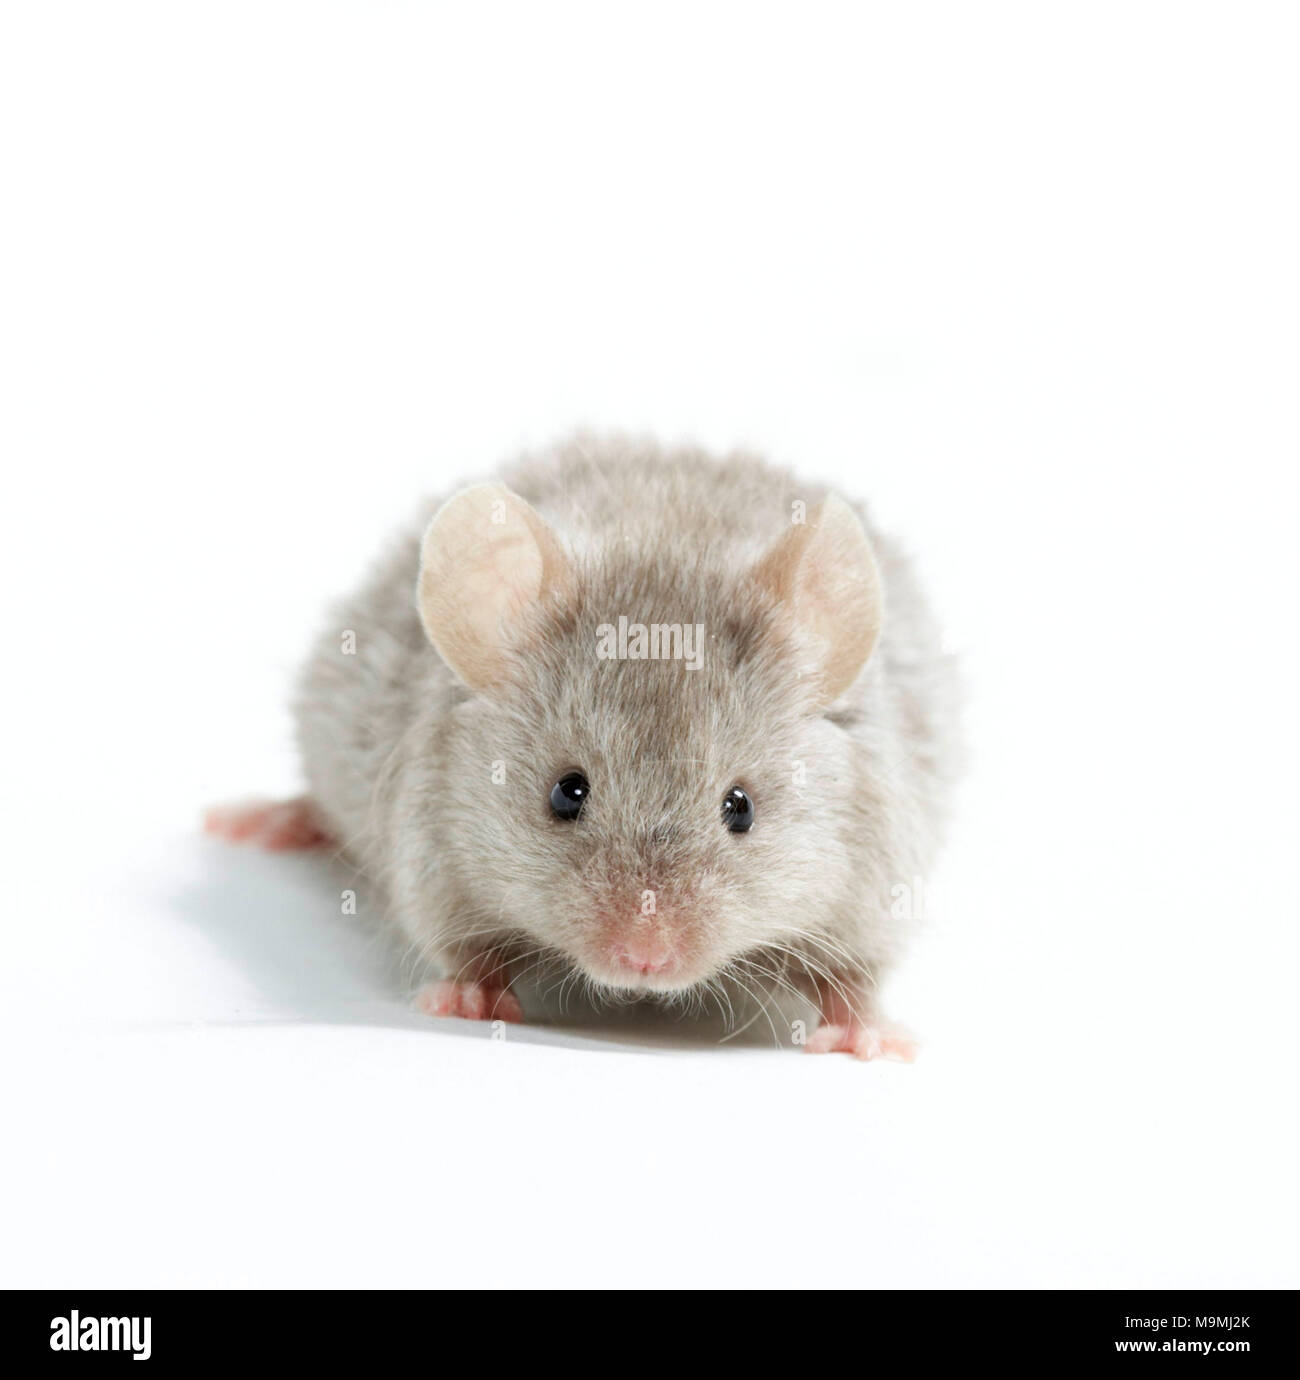 Fancy Mouse. Gray adult, seen head-on. Studio picture against a white background Stock Photo